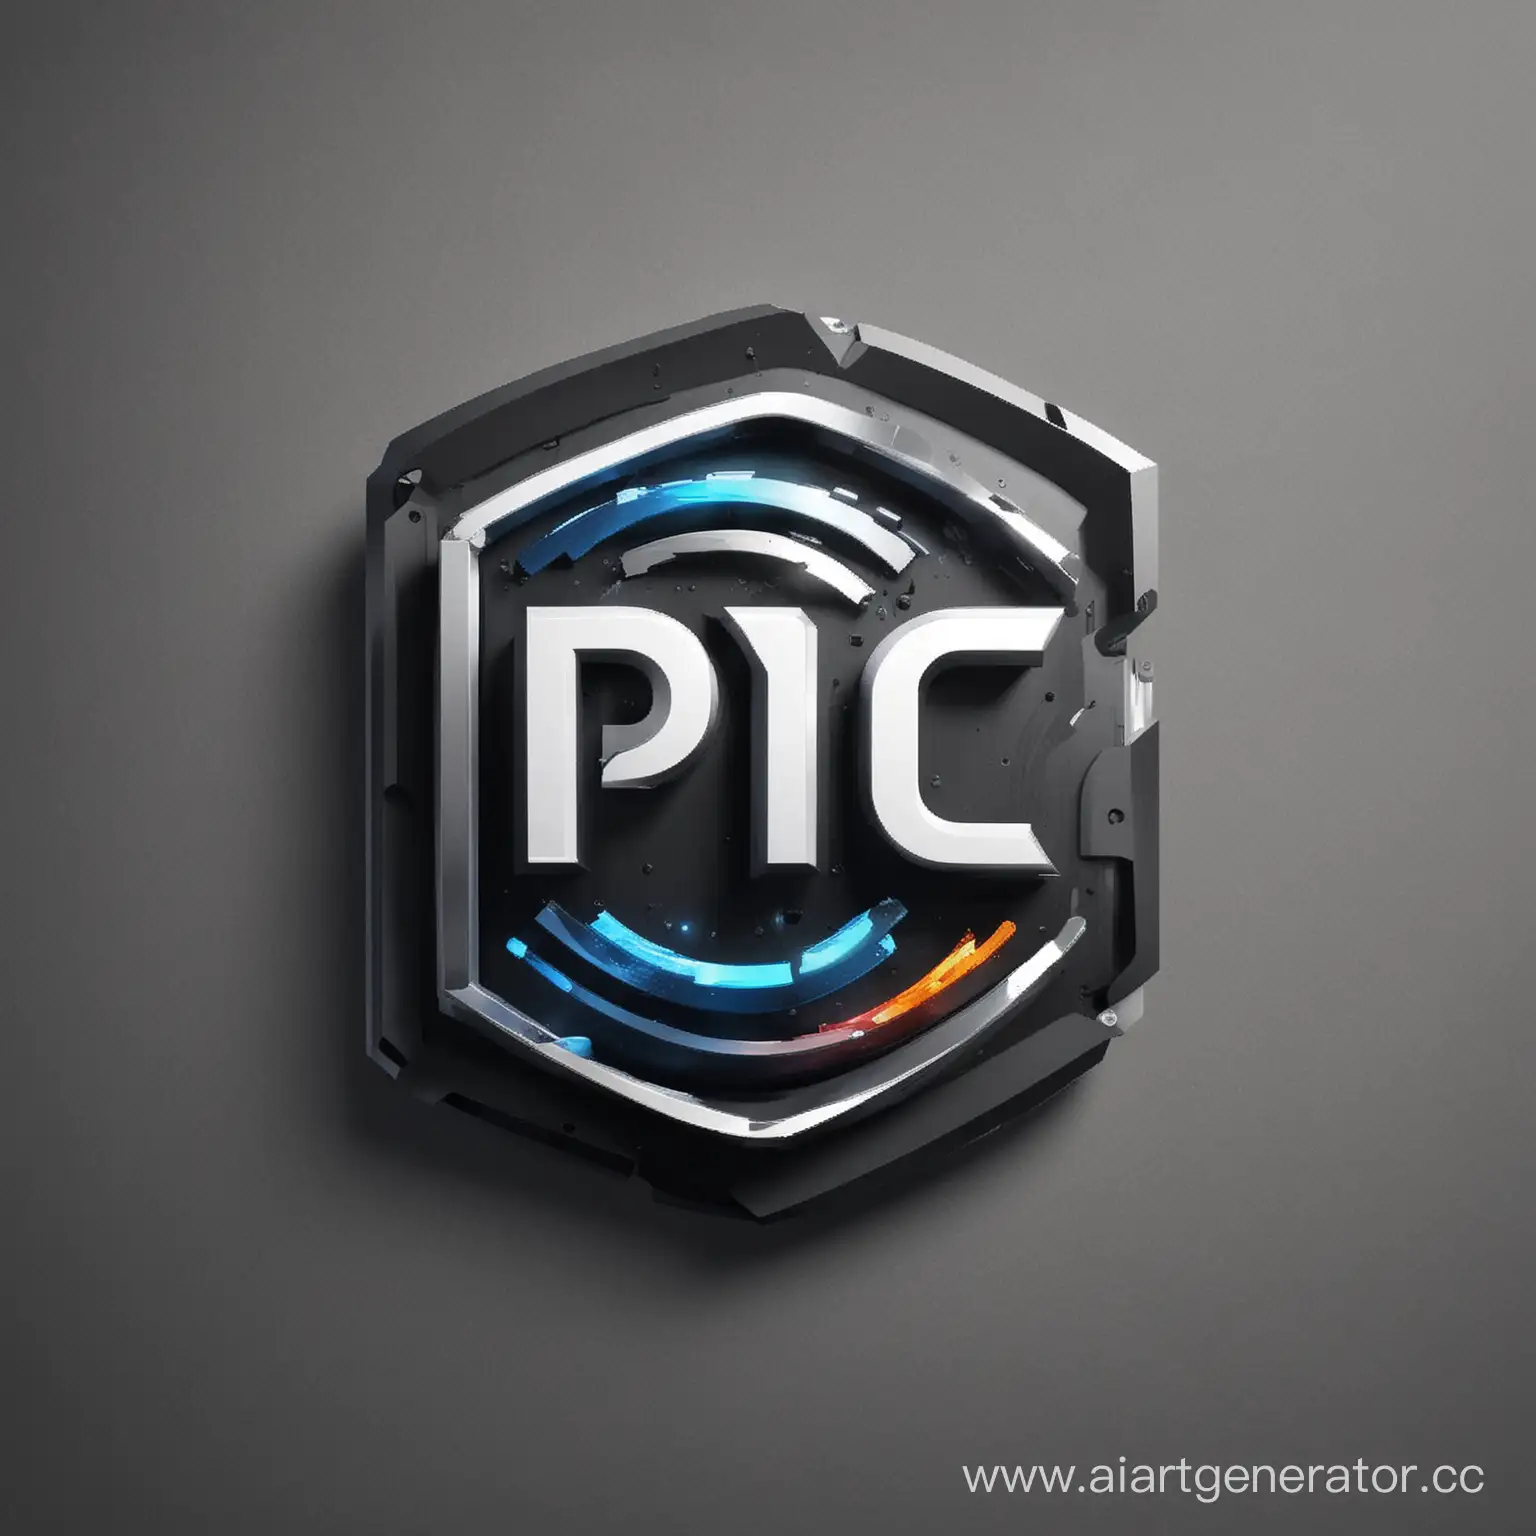 make a logo for the company to build a PC